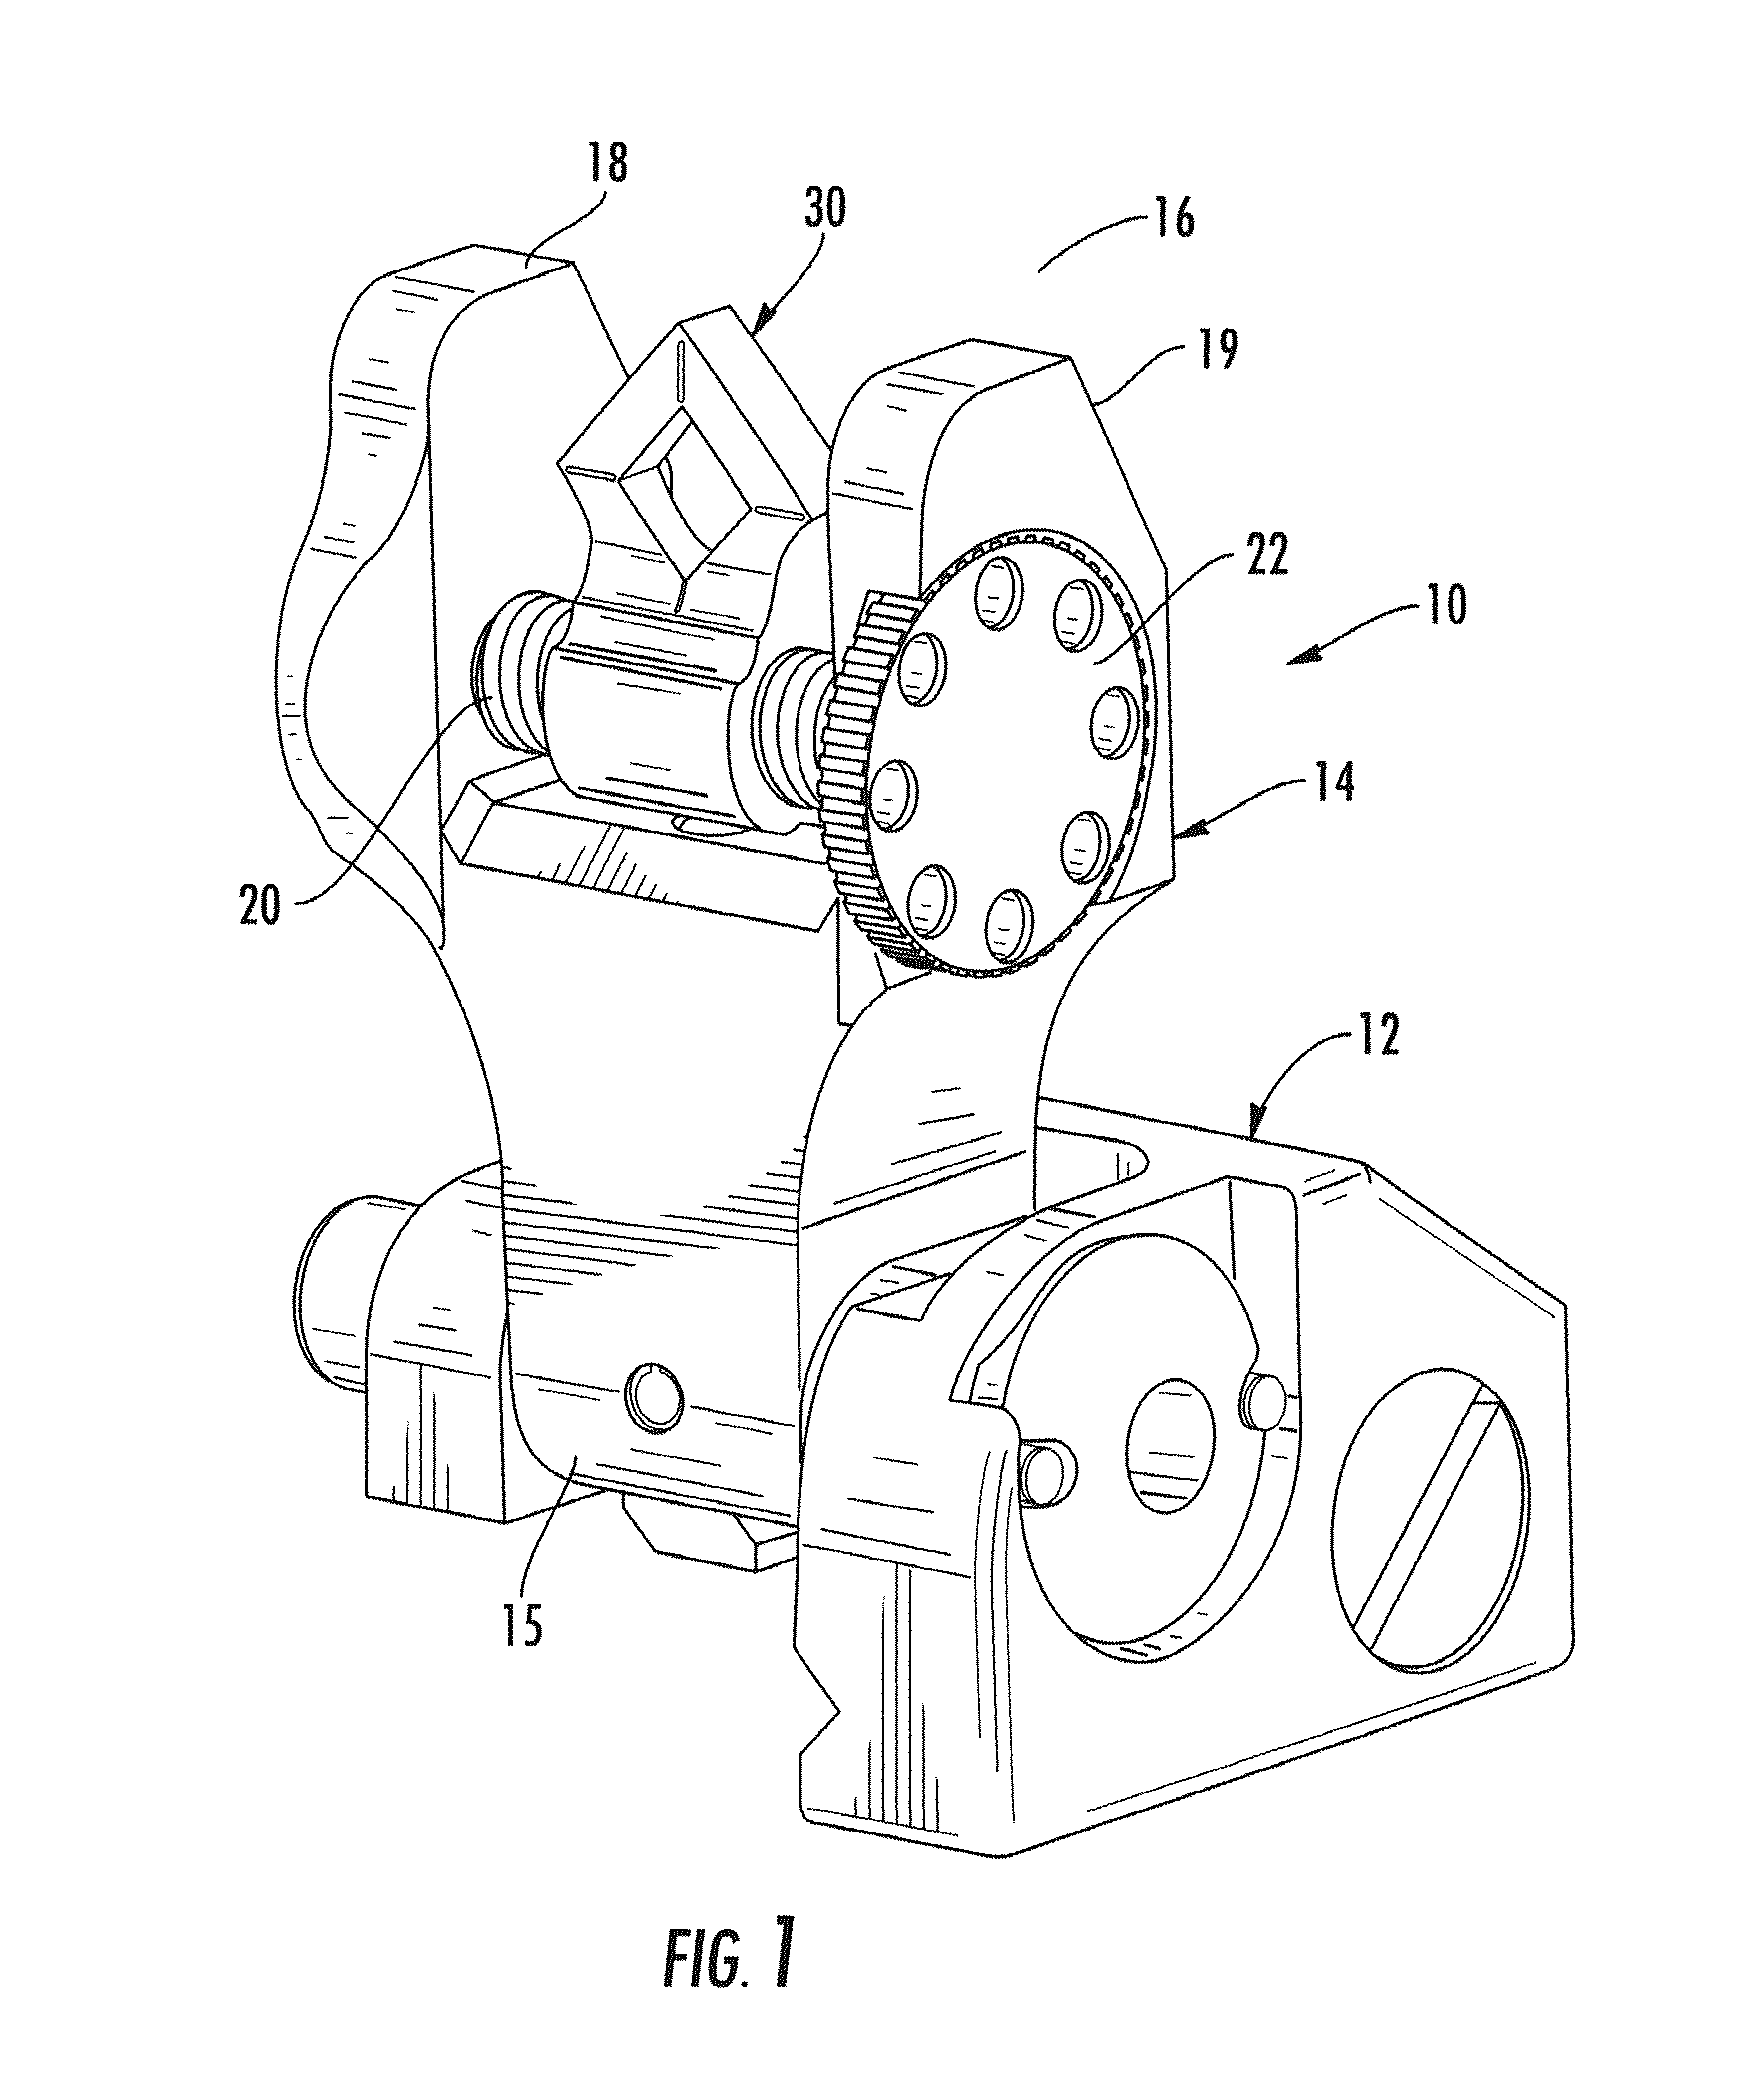 Firearm sight with dual diamond shaped apertures